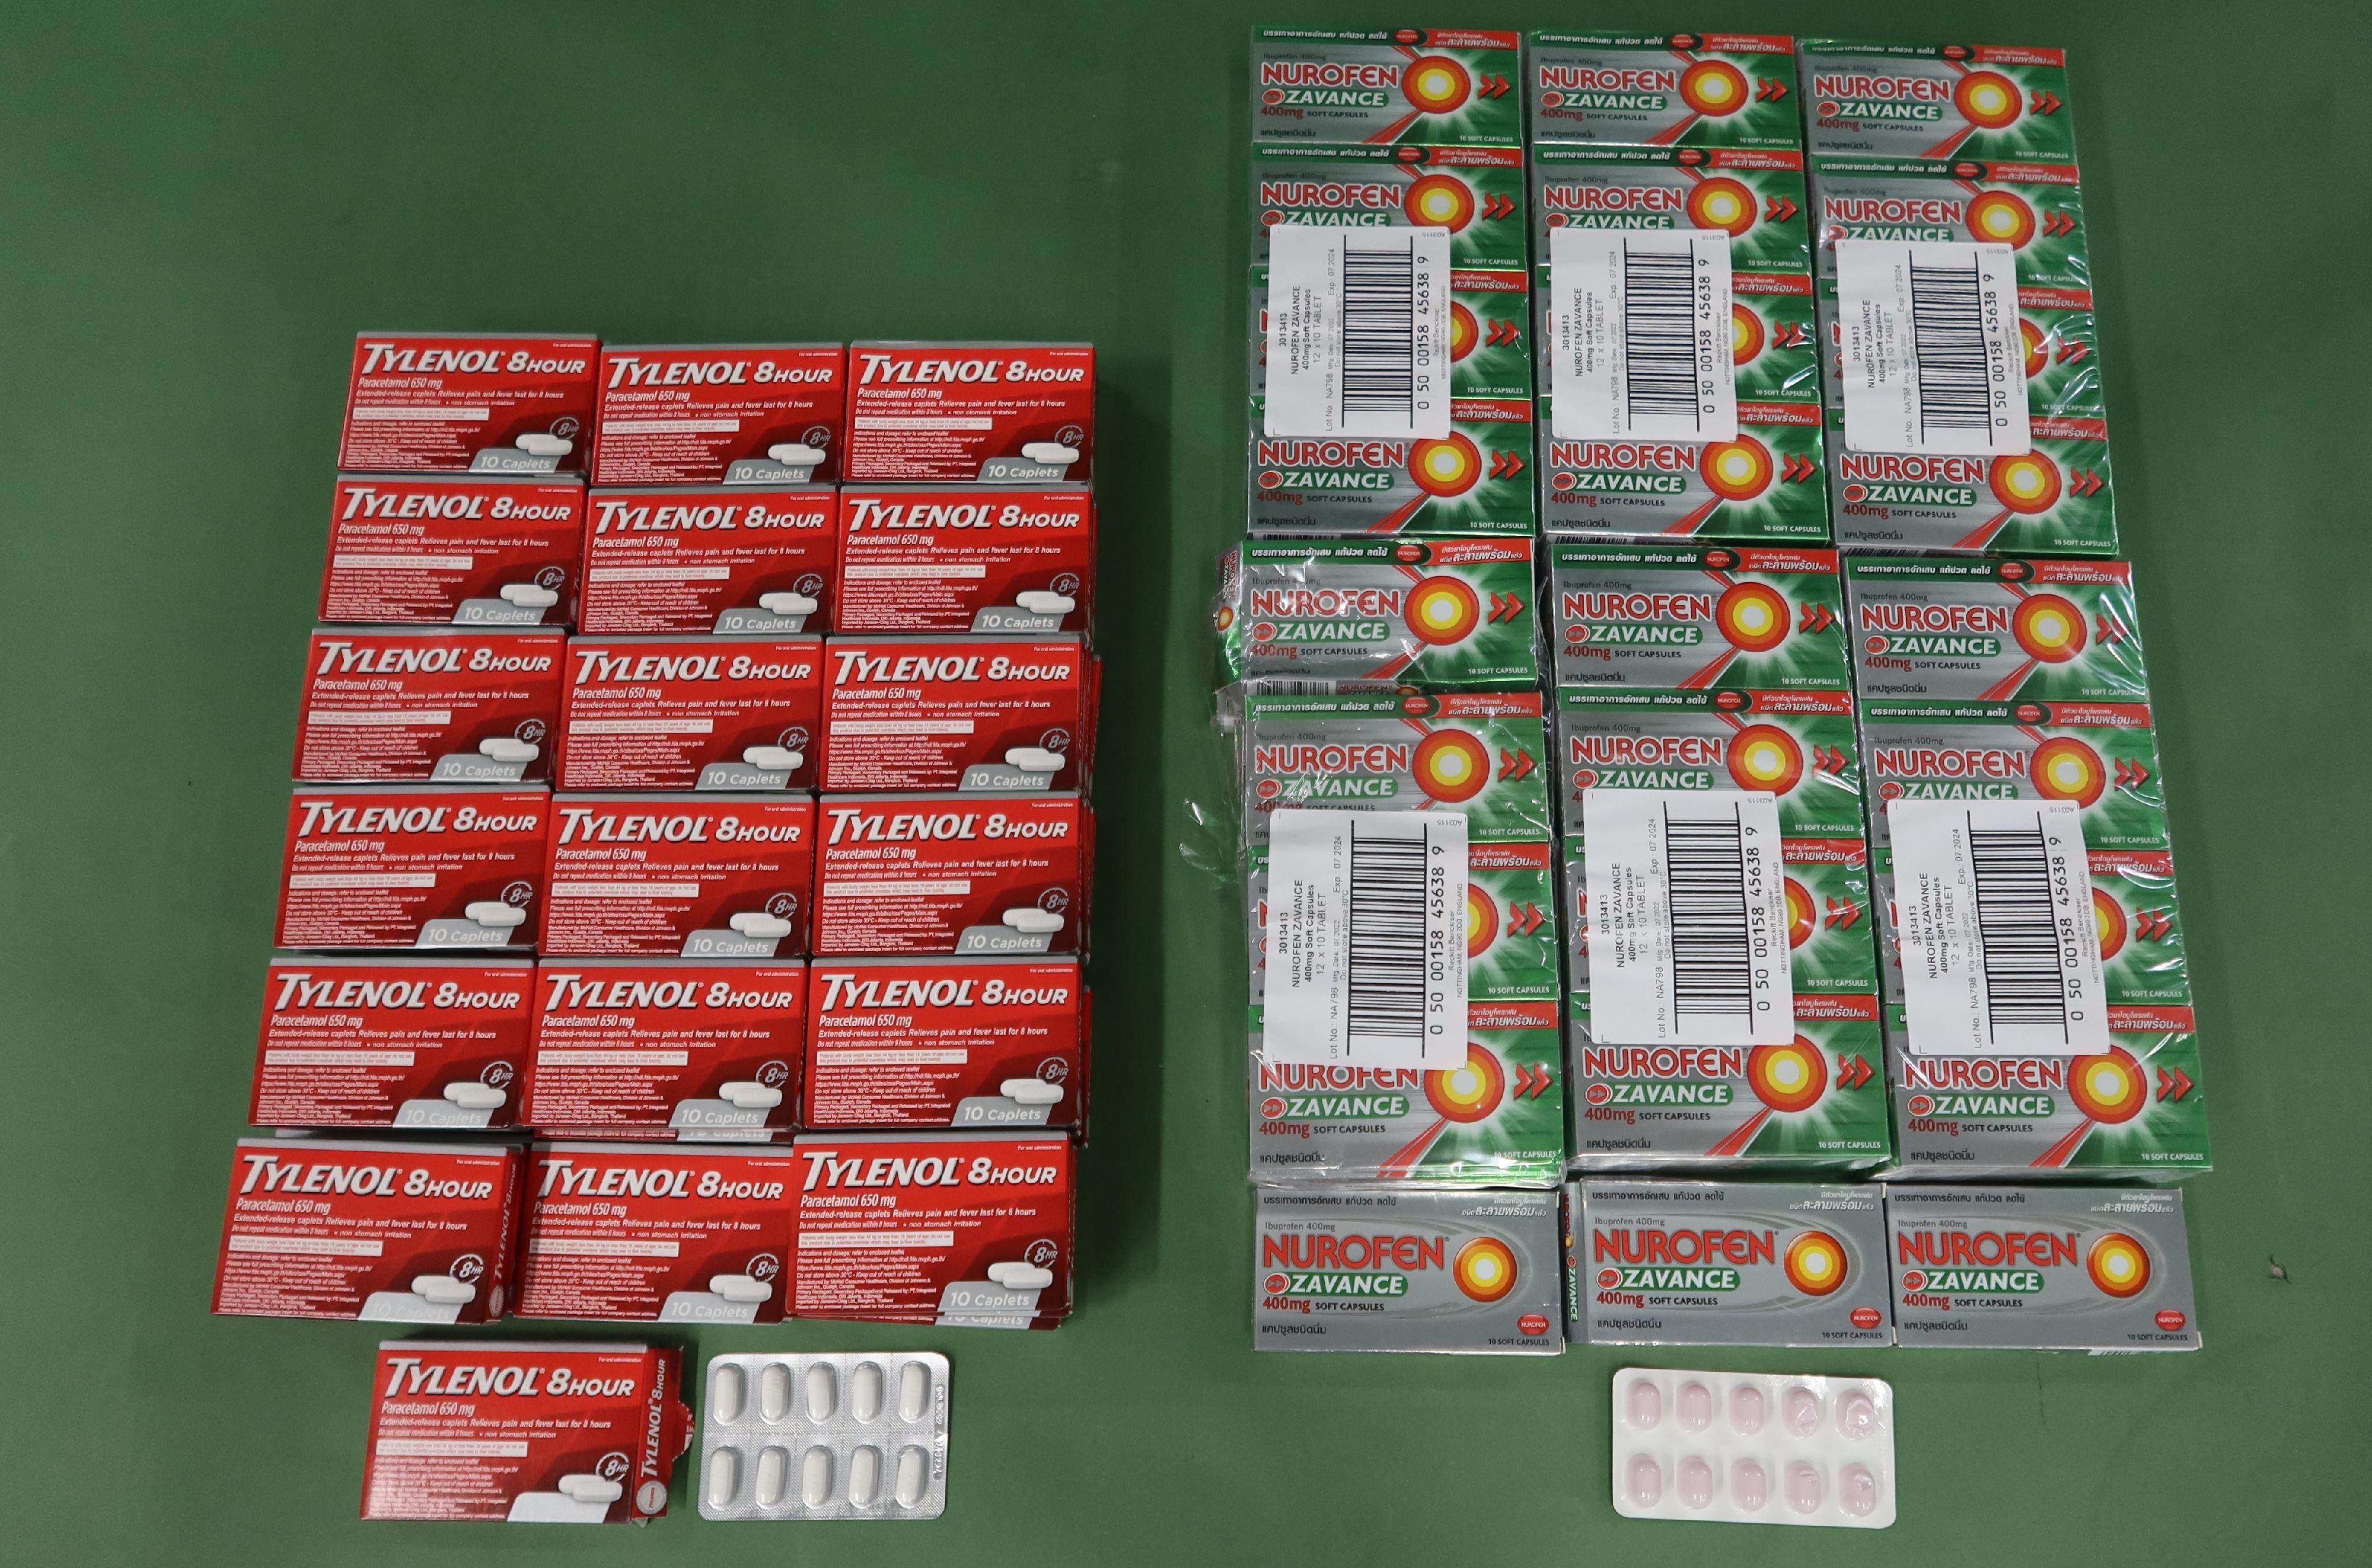 Hong Kong Customs detected four suspected medicine smuggling cases at Hong Kong International Airport on January 9 and yesterday (January 11). More than 12 000 tablets, about 4 388 milliliters and about 186 grams of suspected controlled medicines, with a total estimated market value of about $540,000, were seized. Photo shows the suspected controlled medicines, including pain and fever relief medicines containing paracetamol and cold medicines, seized by Customs officers from the hand-carried baggage of an incoming male passenger.